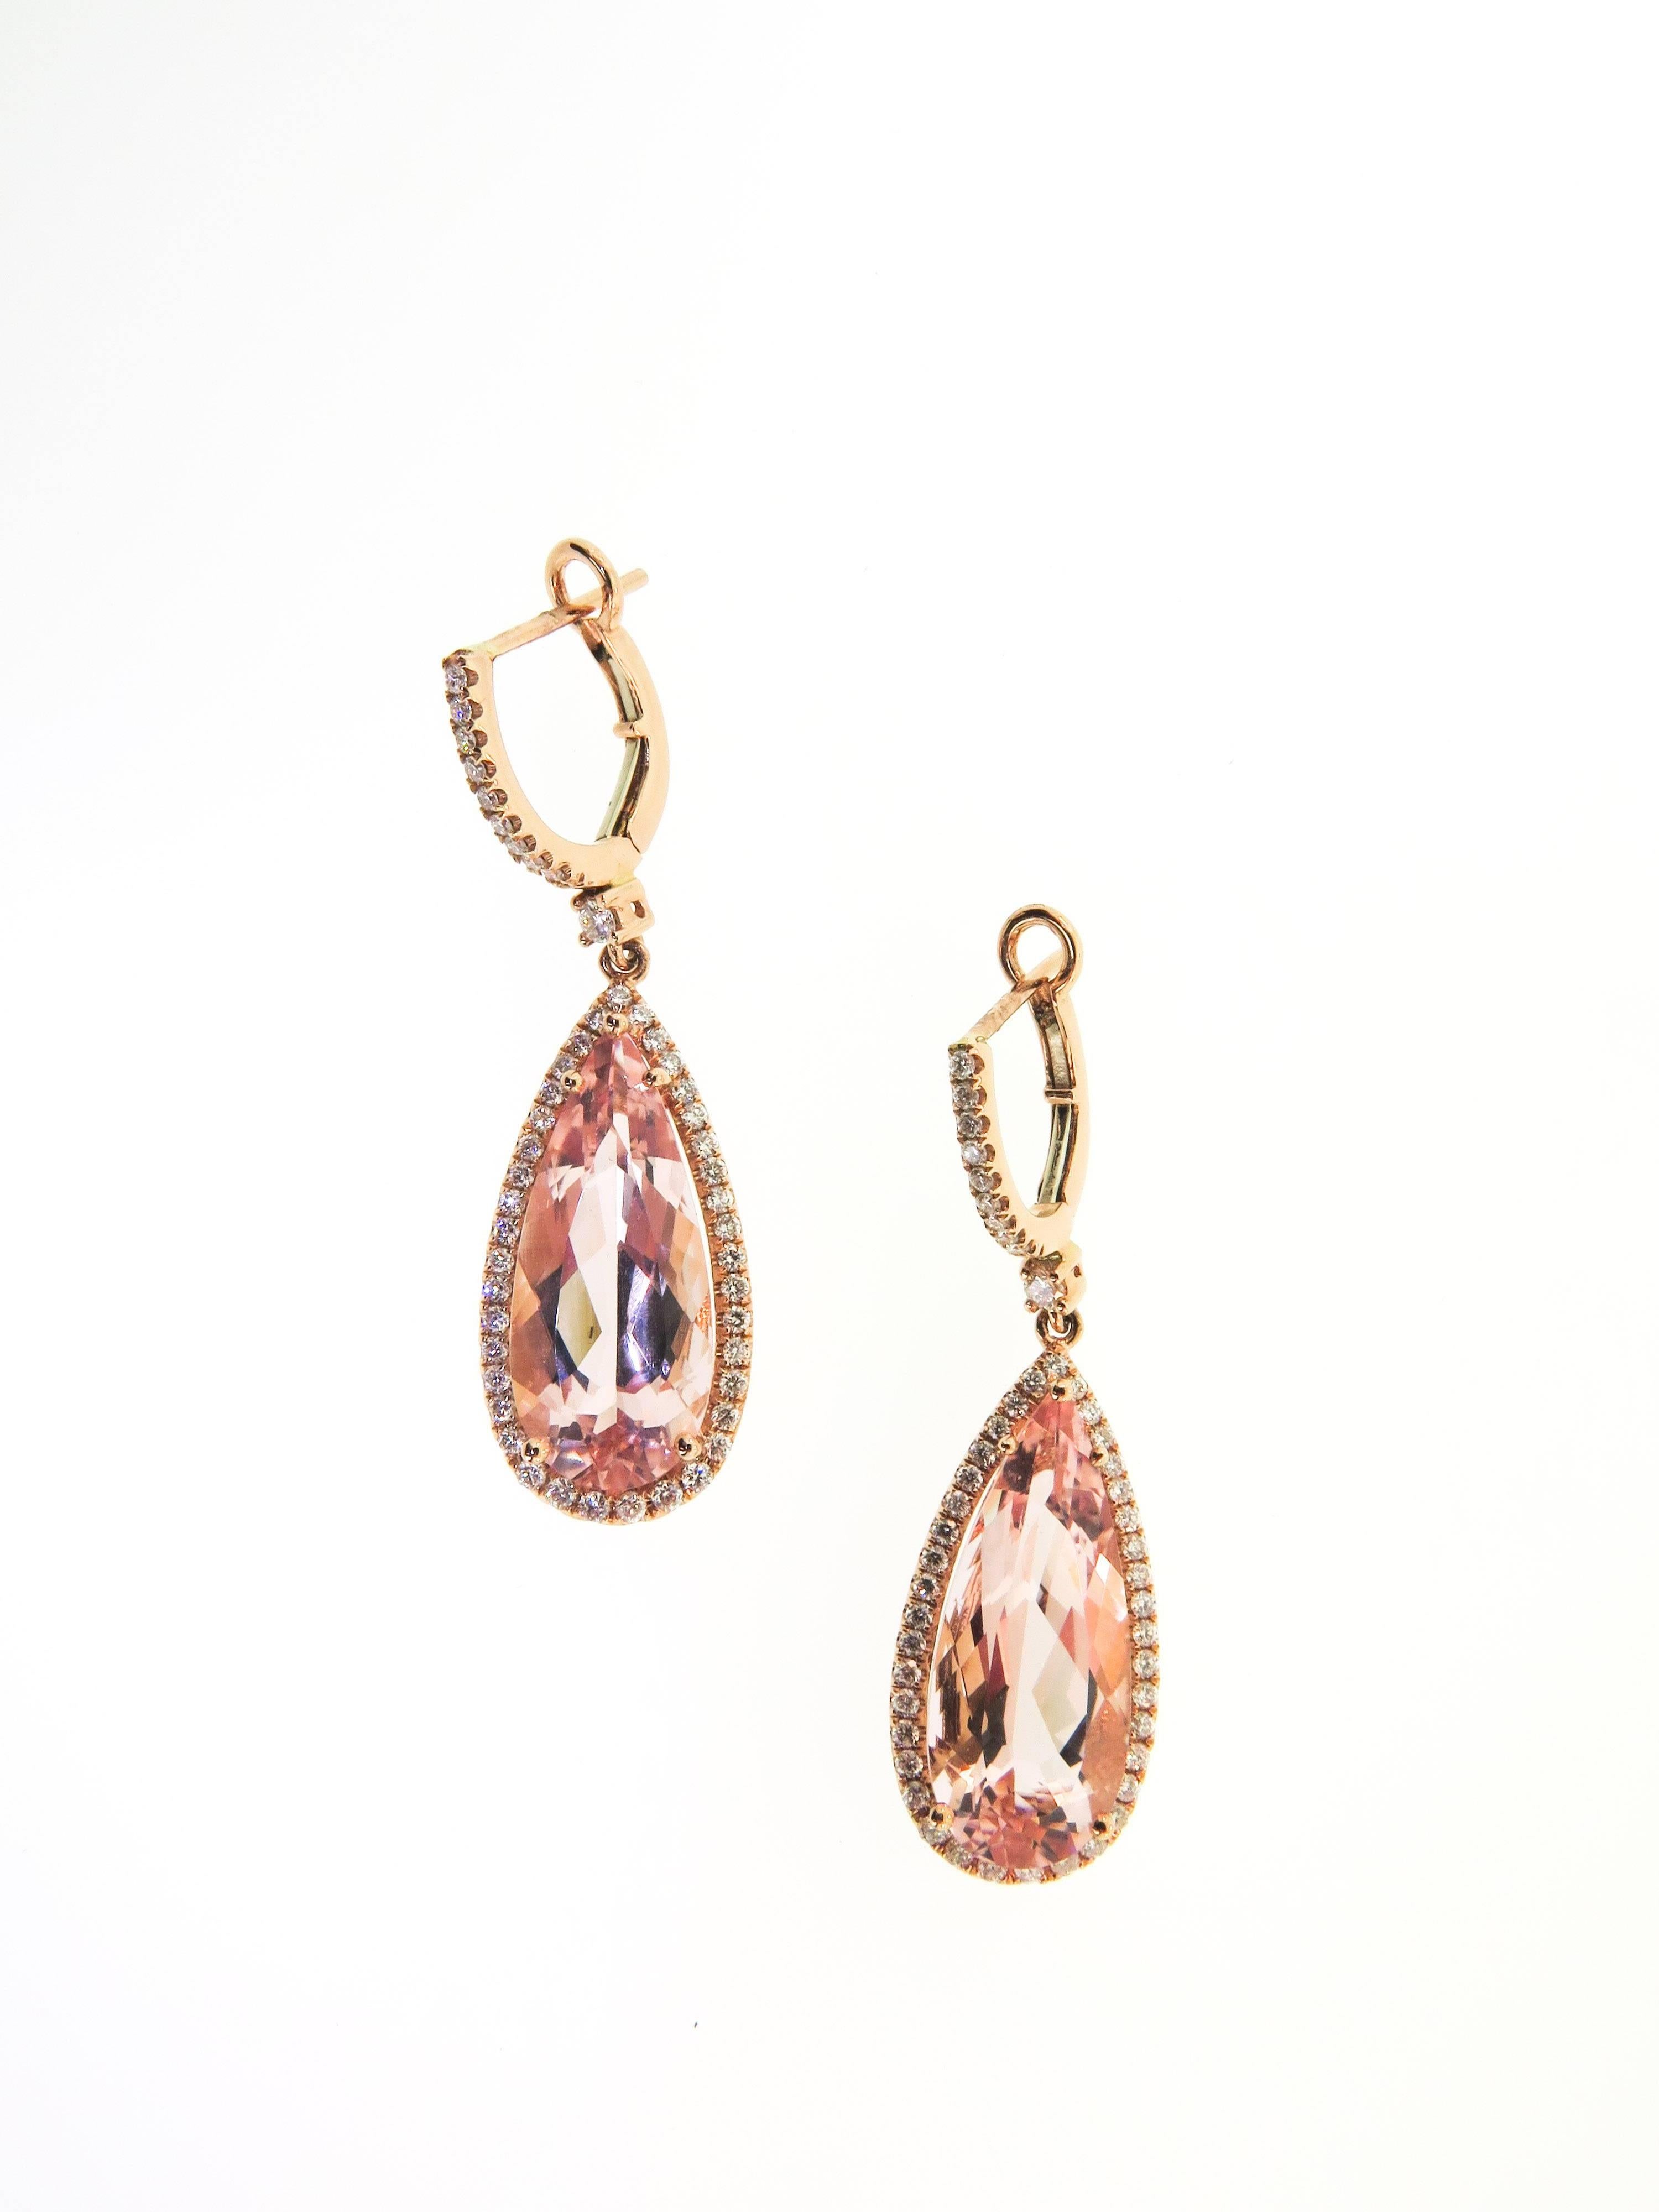 This elegant Morganite drop earrings can be a cocktail earring or just a fun piece of jewelry to complement your everyday outfit. A pair of pear shaped morganites weighing 9.20ctw are surrounded by 96 round cut micro pave diamonds for a total weight